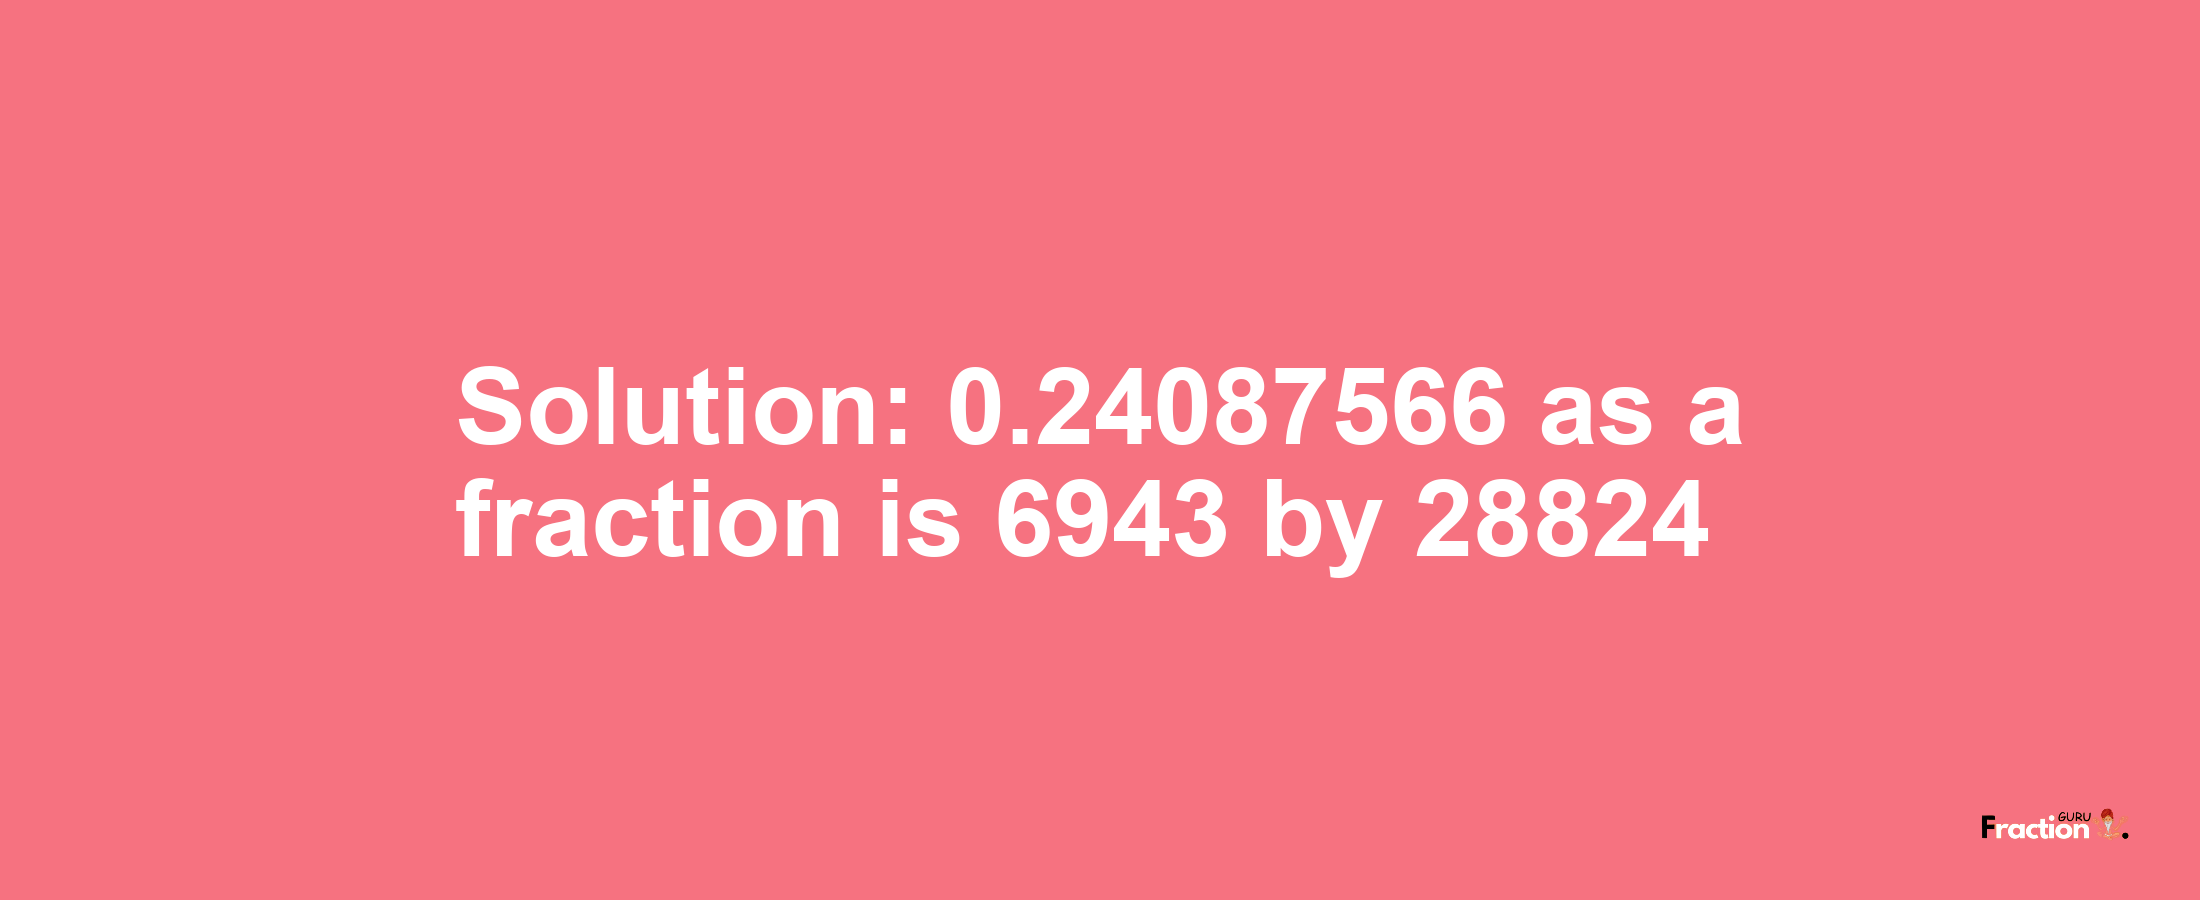 Solution:0.24087566 as a fraction is 6943/28824